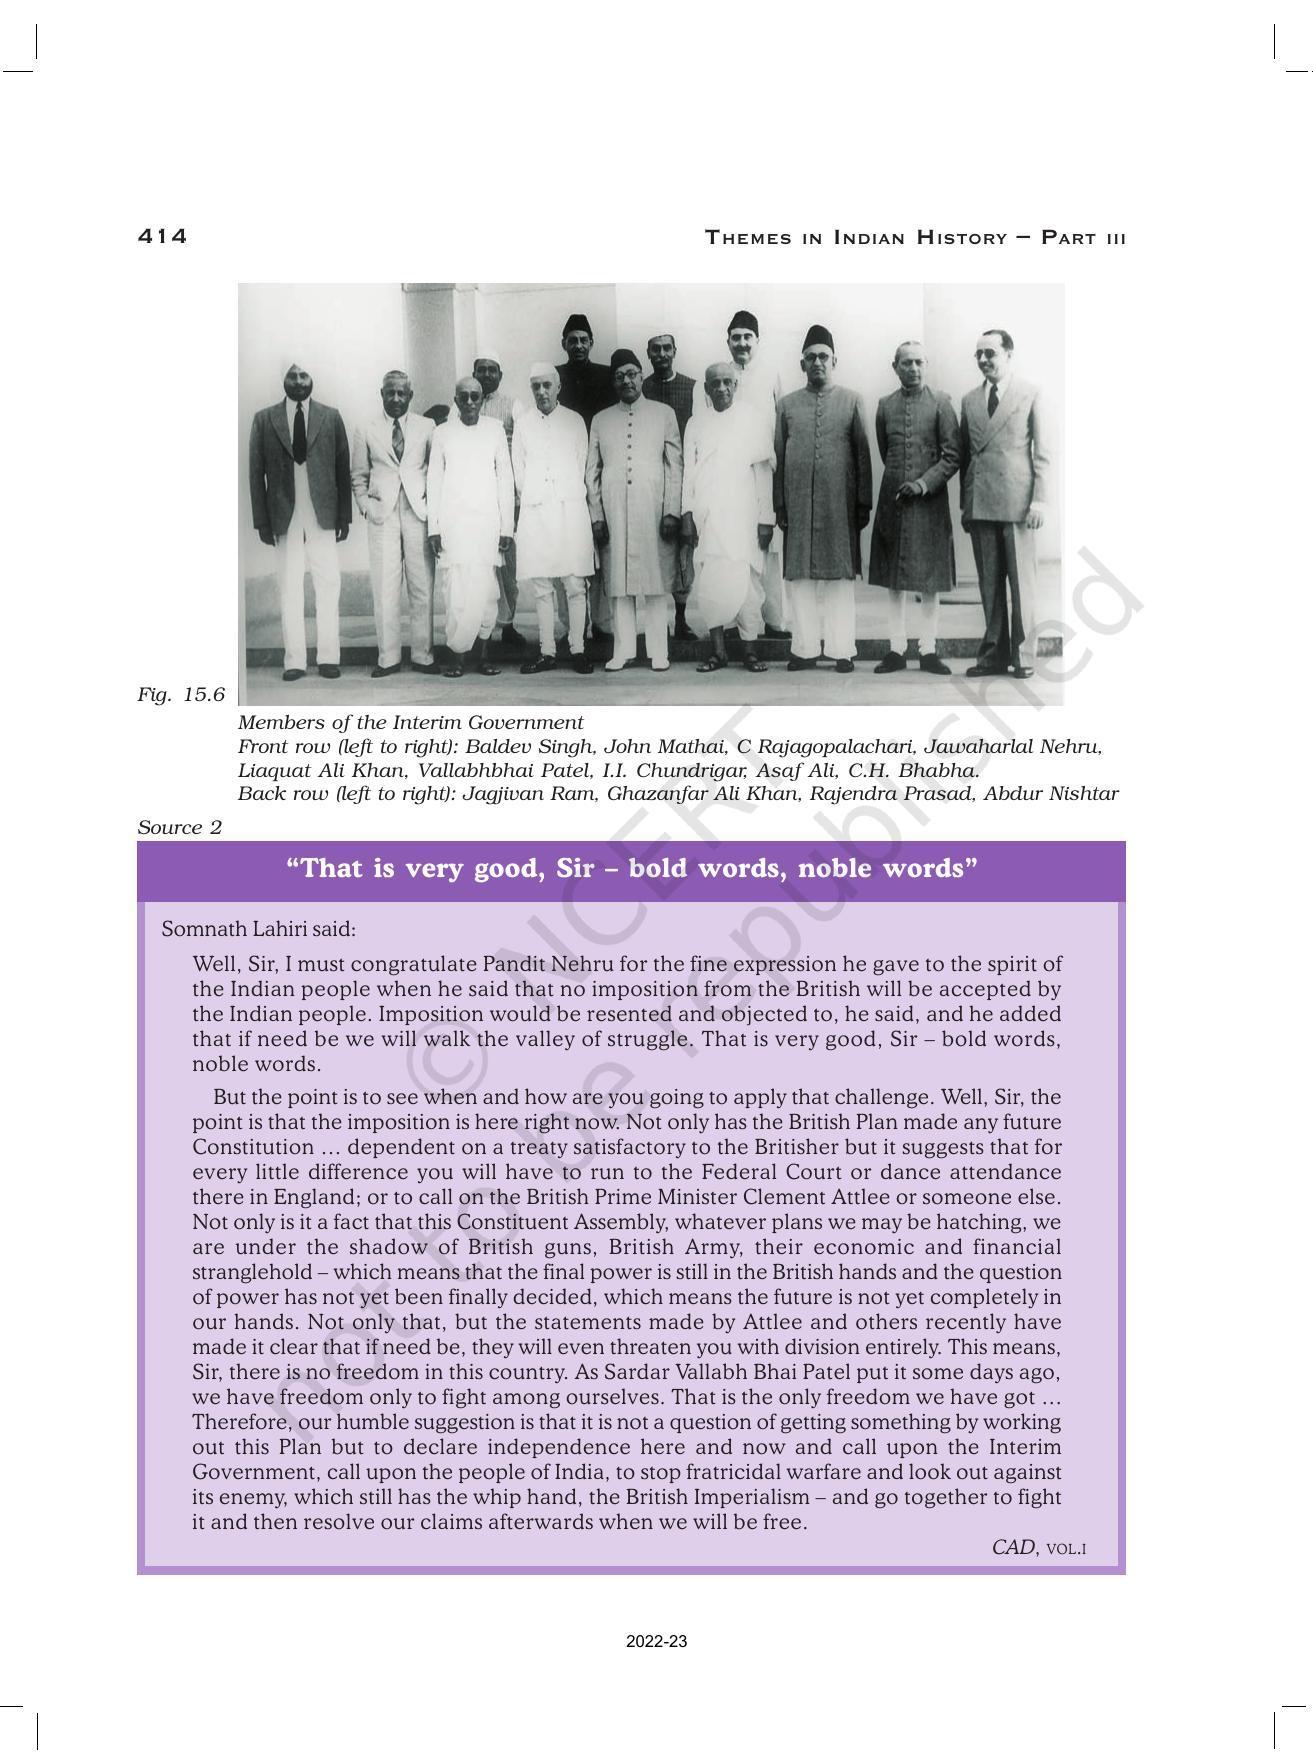 NCERT Book for Class 12 History (Part-III) Chapter 15 Framing and the Constitution - Page 10